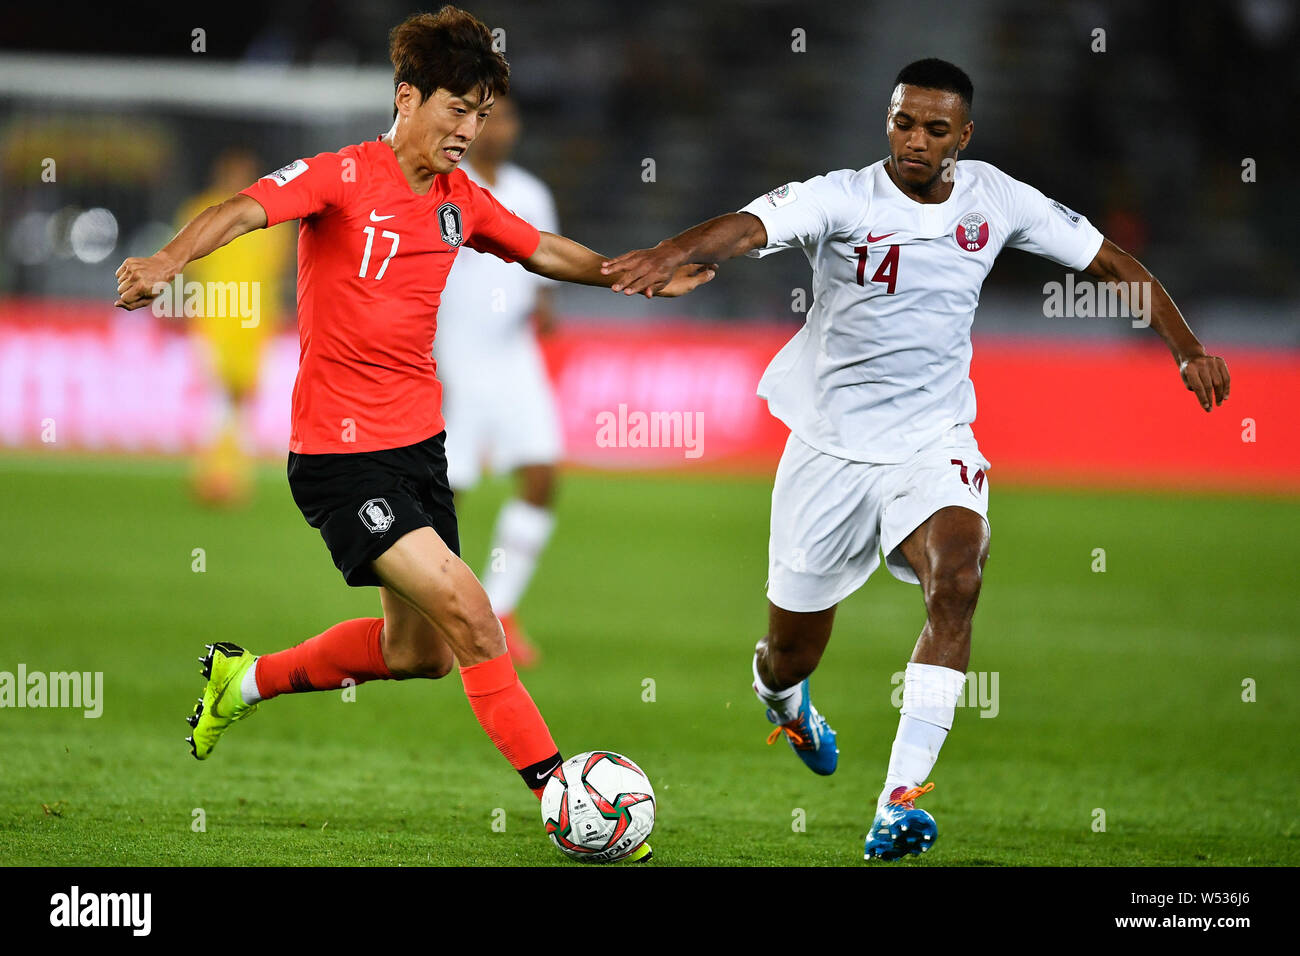 Lee Chung-yong, left, of South Korea national football team passes the ball against a player of Qatar national football team in their quarter-final ma Stock Photo